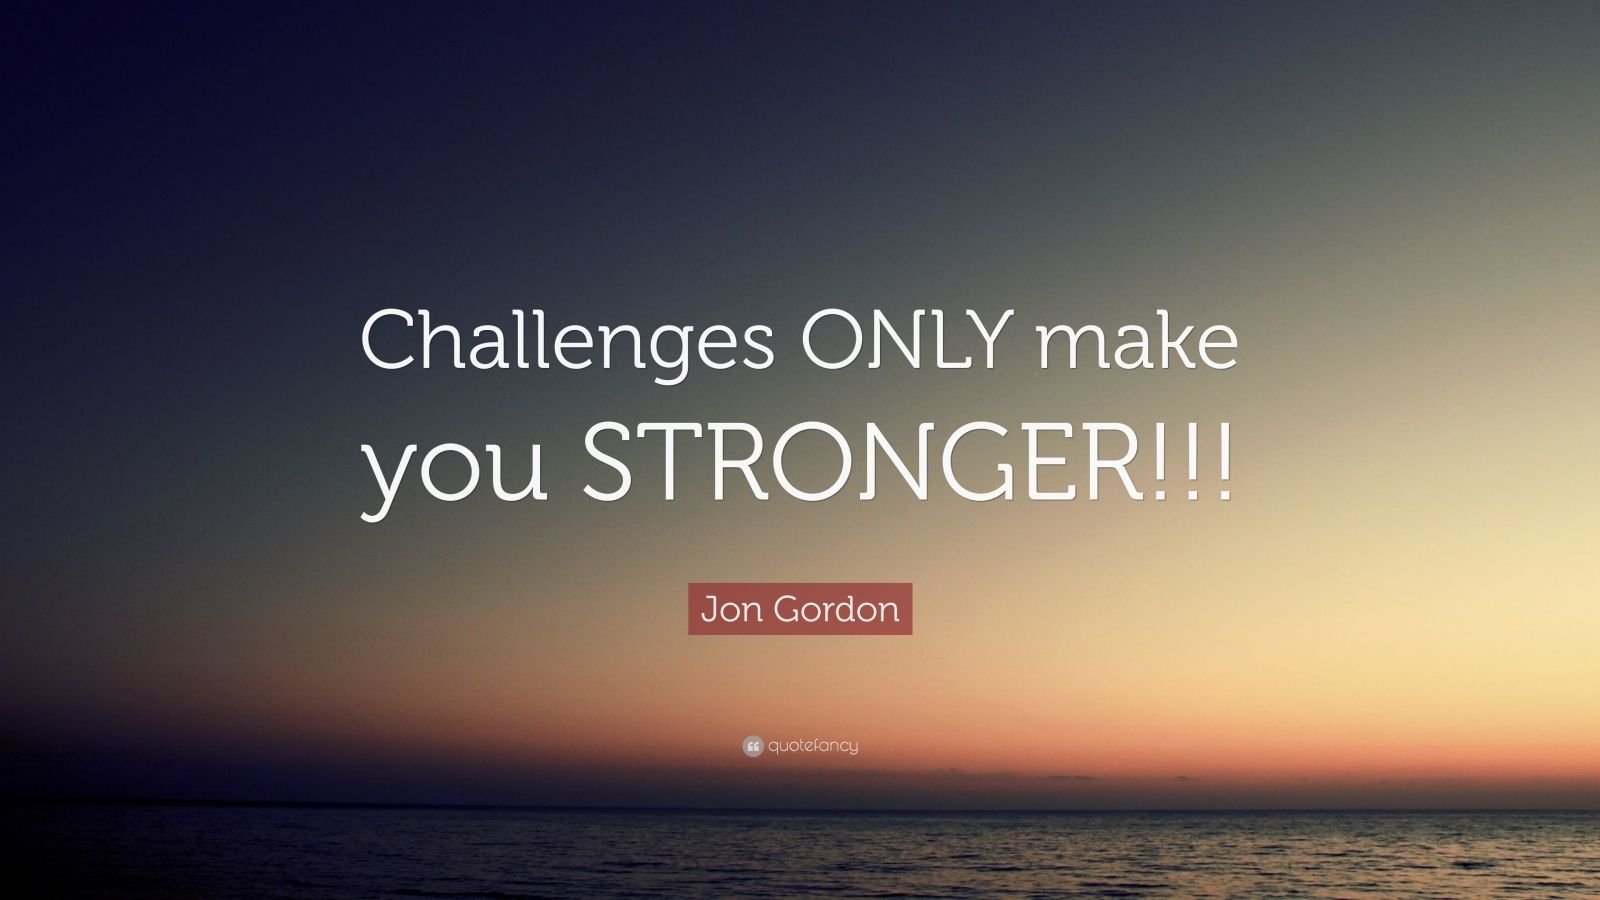 Jon Gordon Quote “challenges Only Make You Stronger” 9 Wallpapers Quotefancy